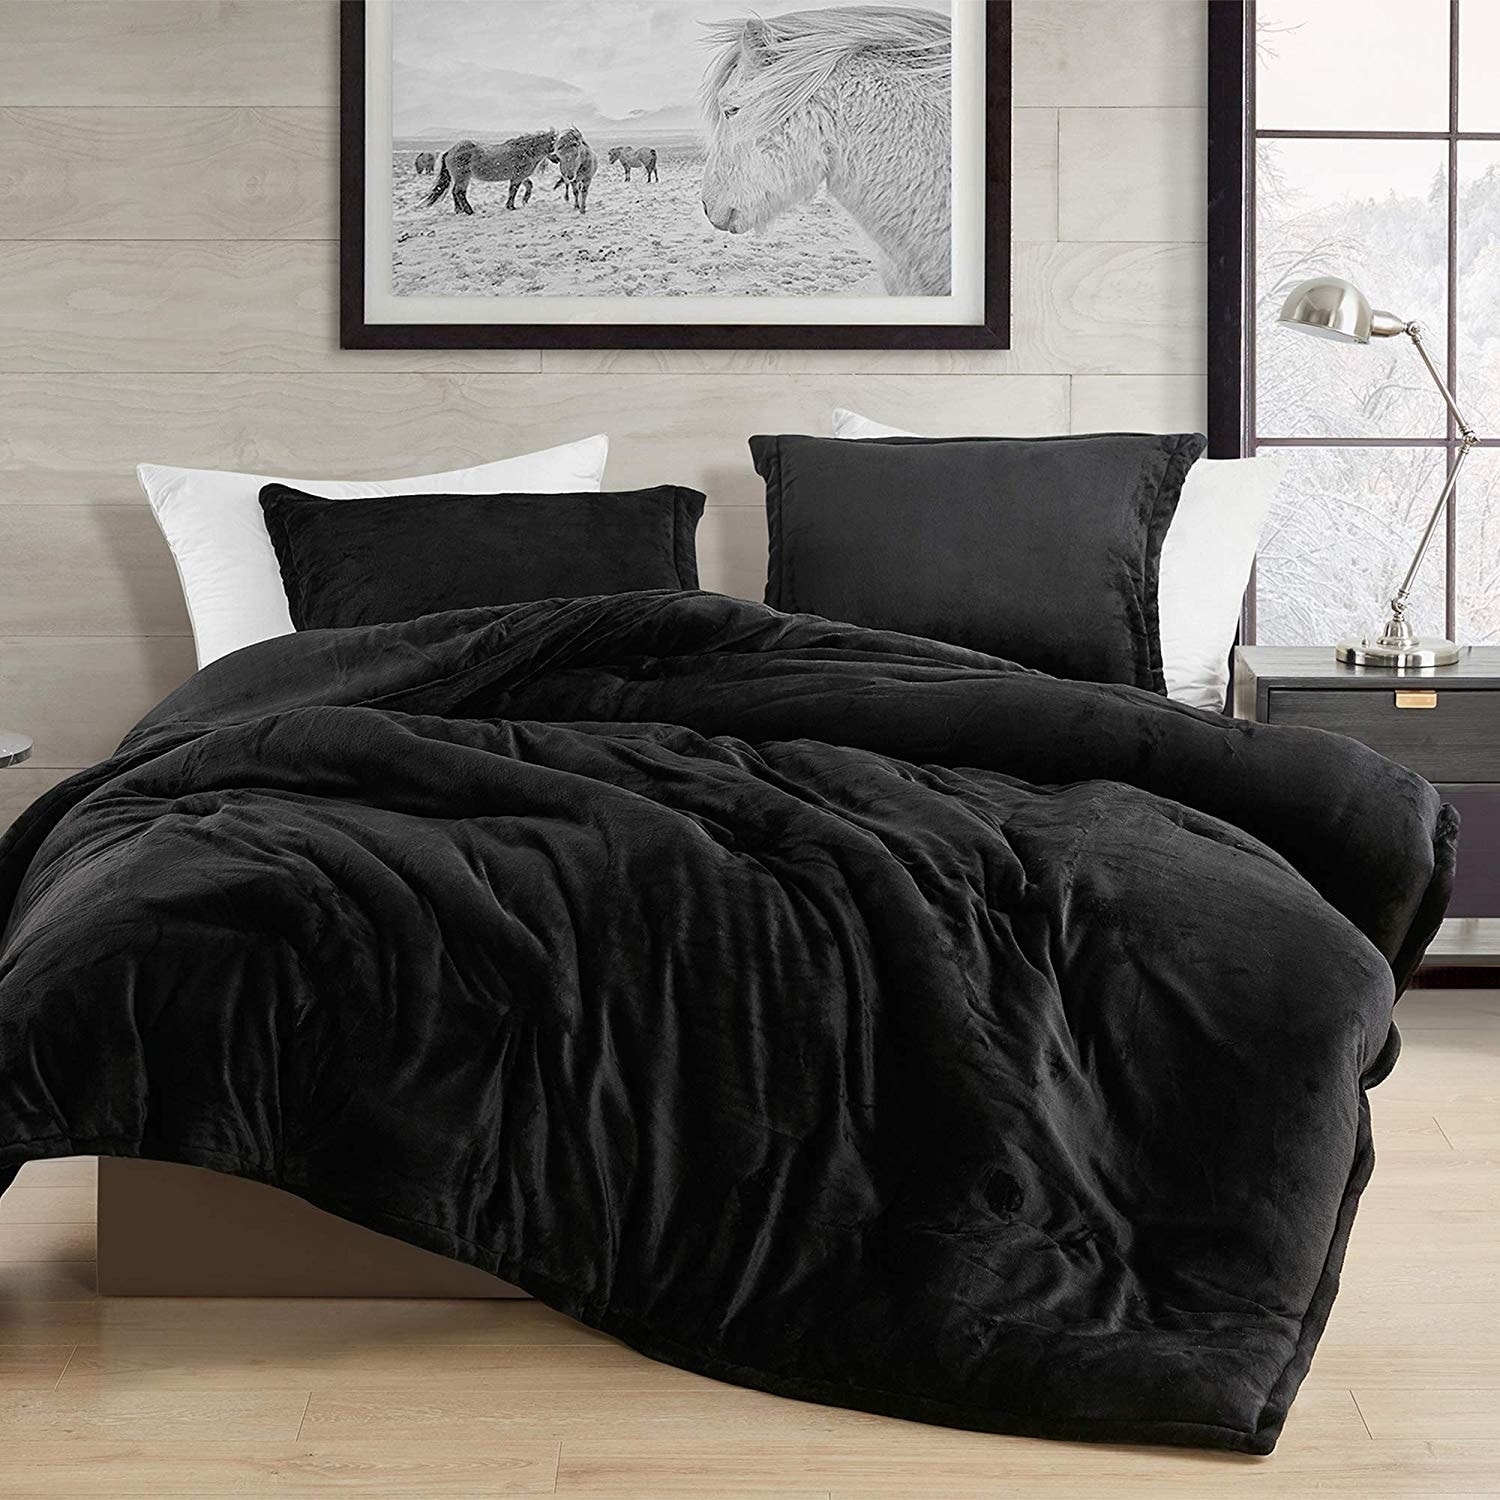 Black Touchy Feely Coma Inducer Oversized Comforter On Sale Overstock 28858917